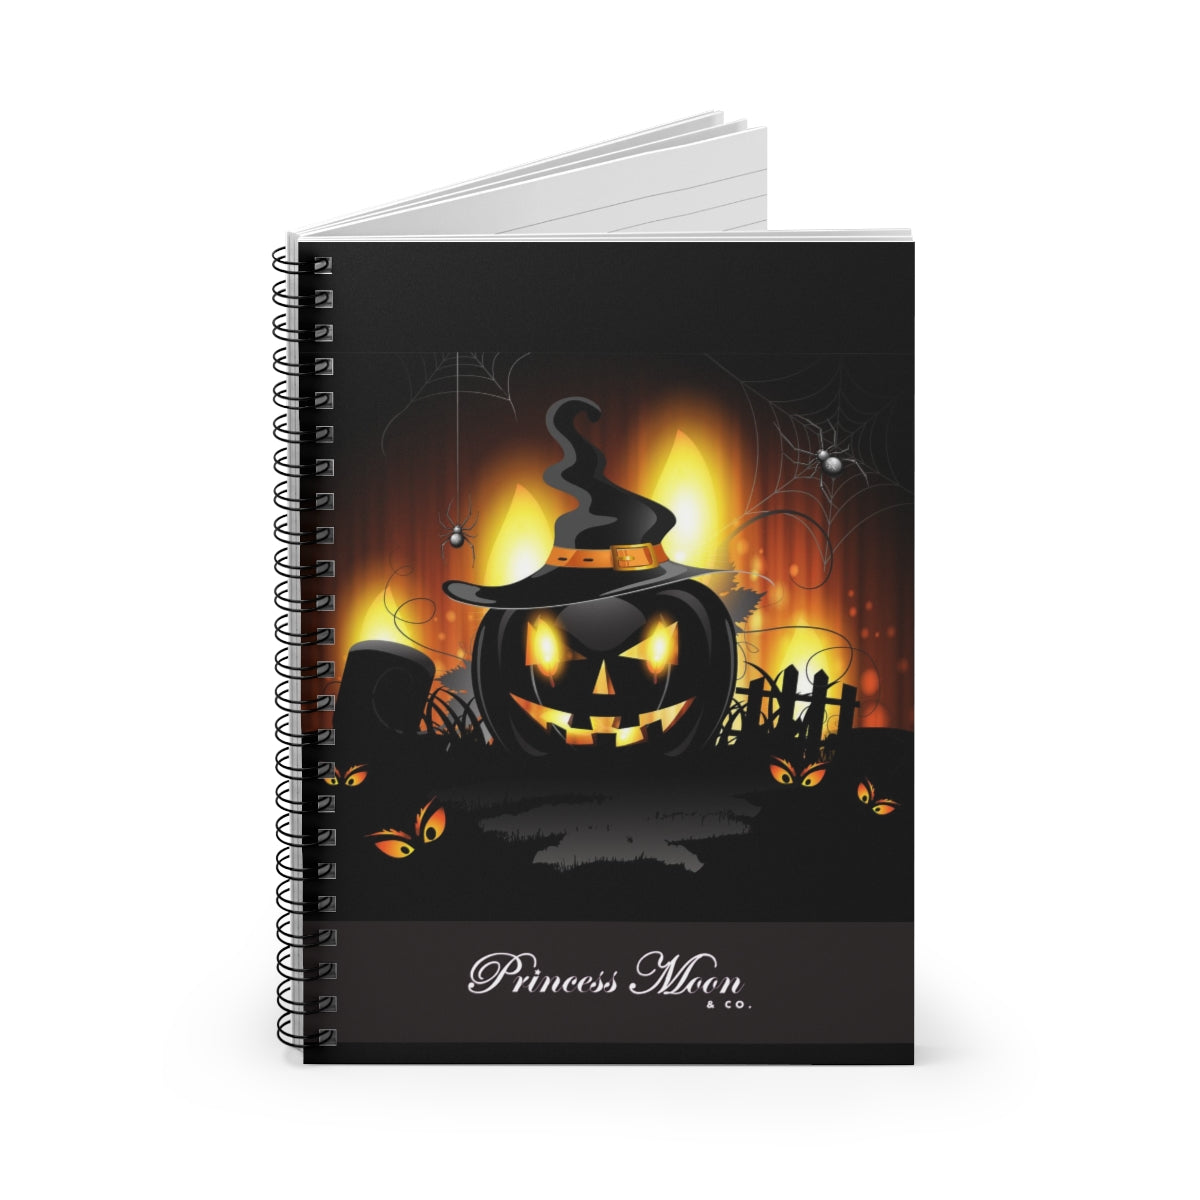 Fright Night Spiral Notebook - Ruled Line